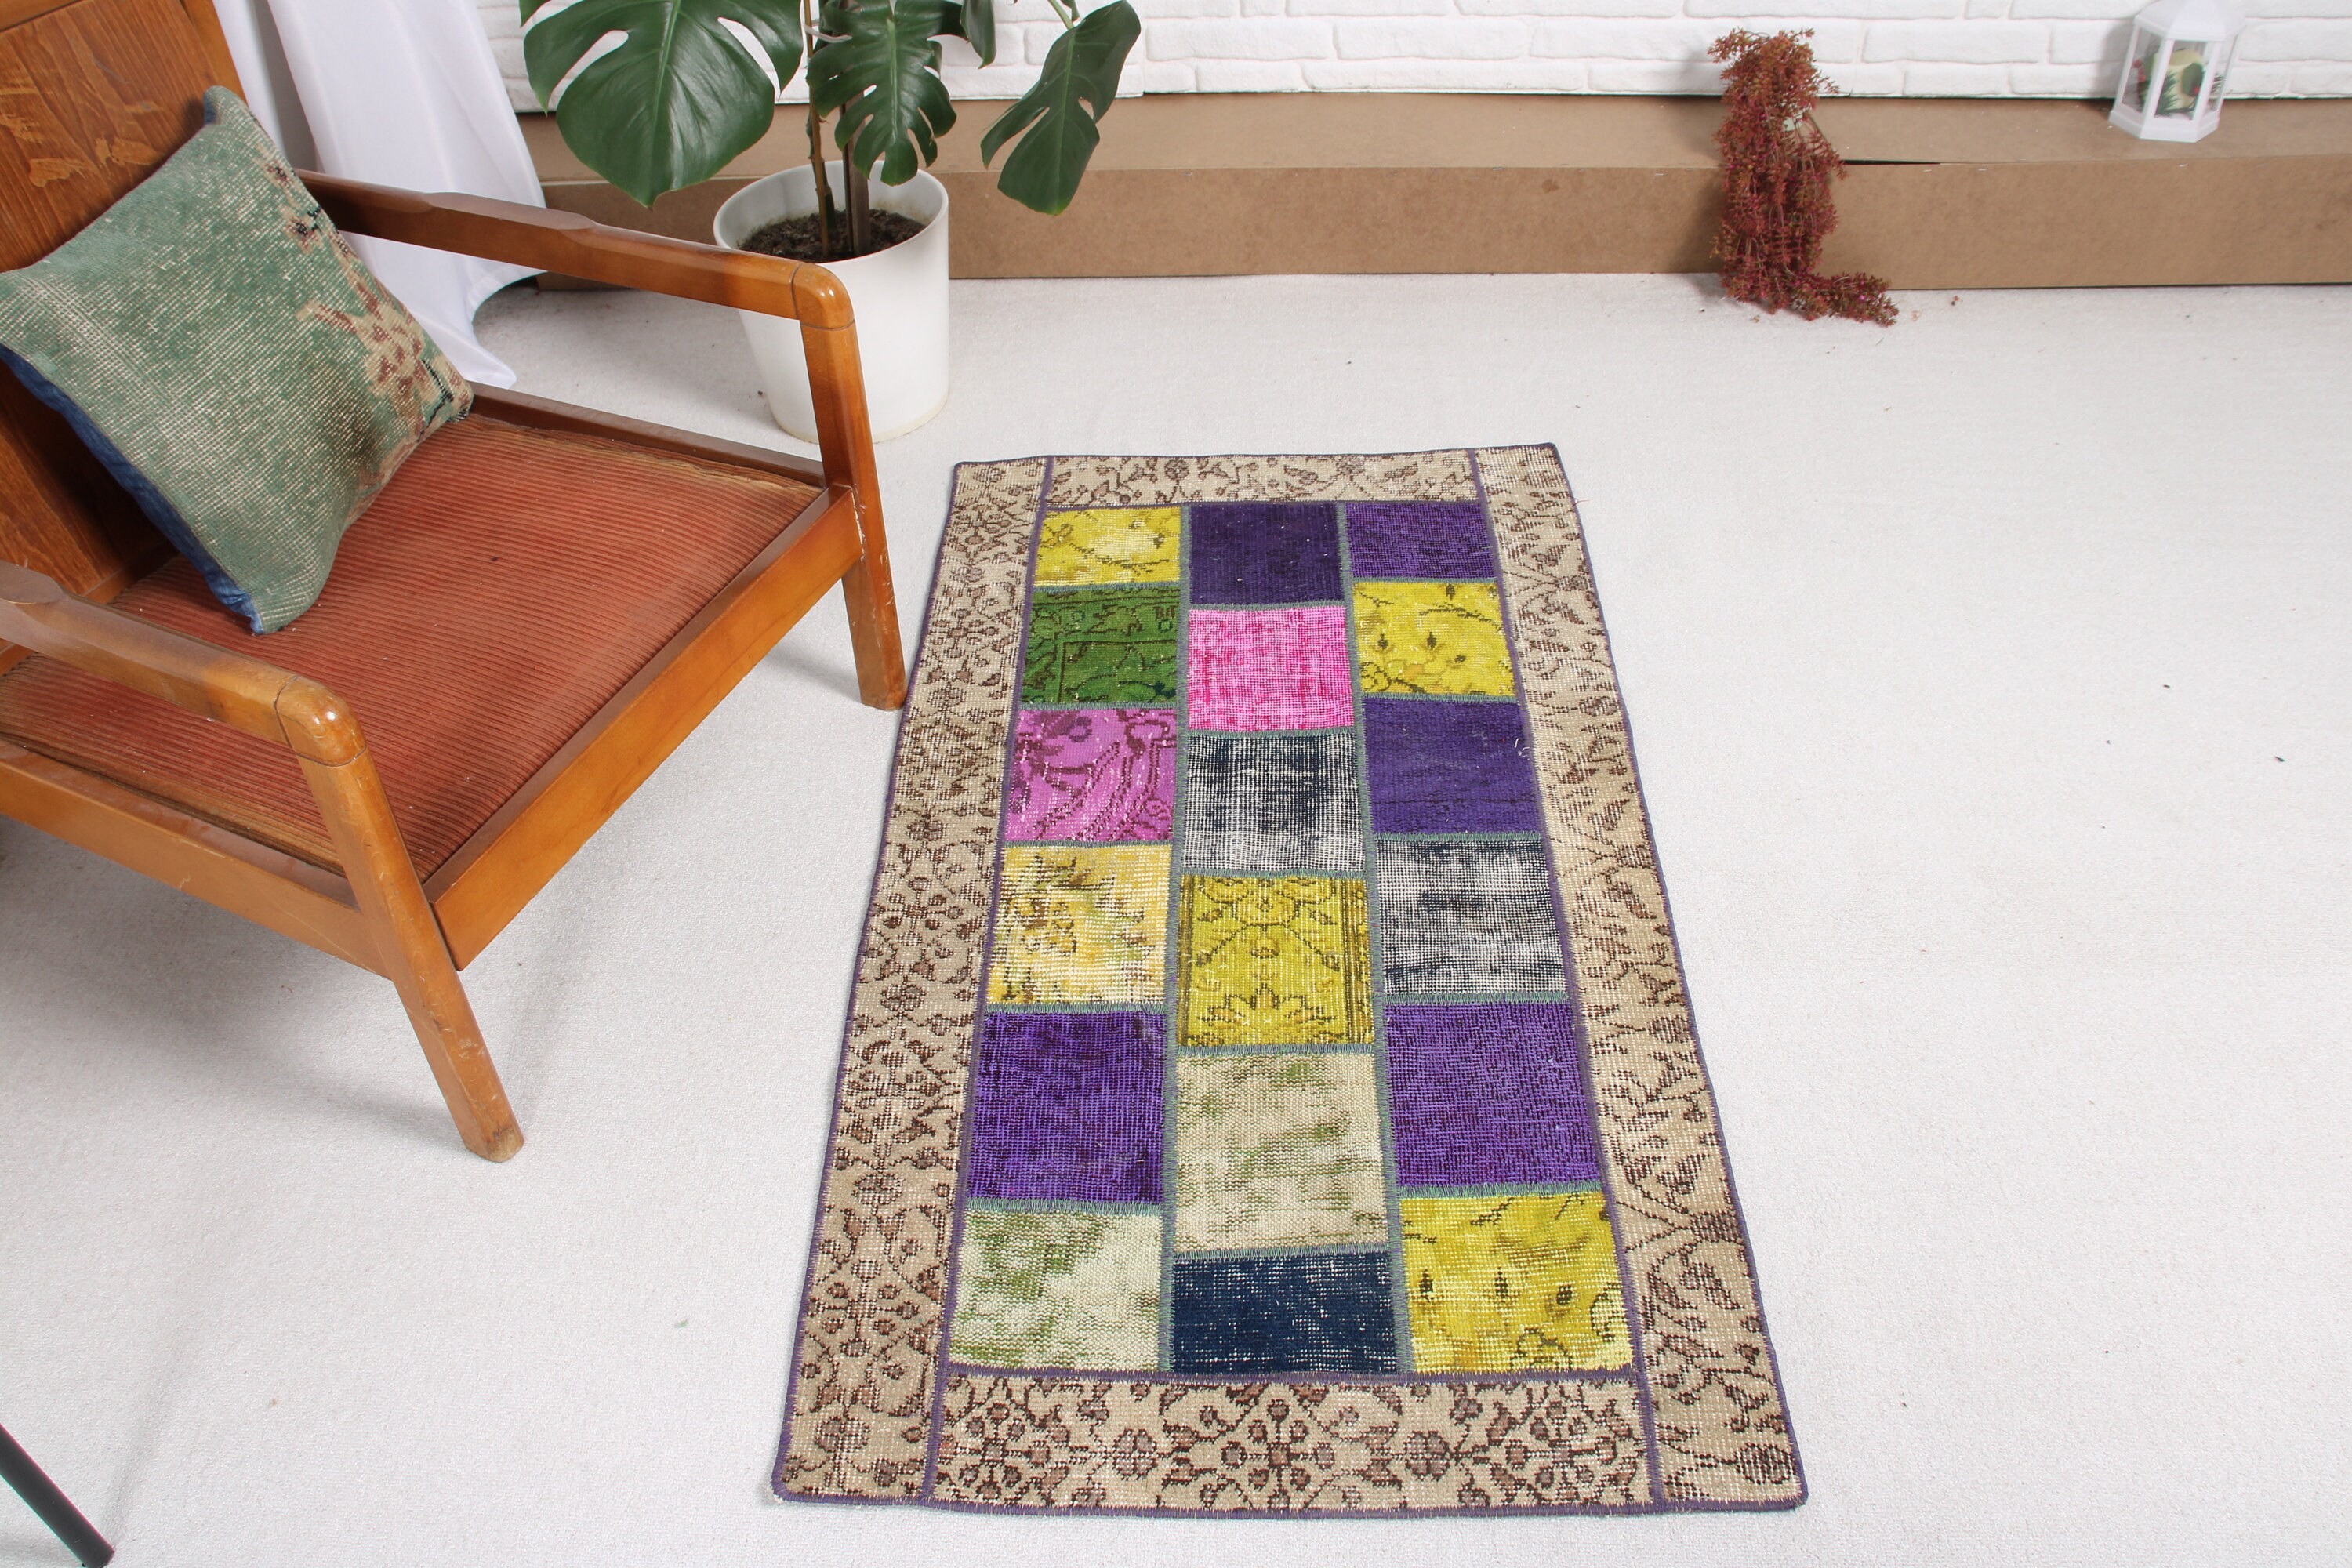 Car Mat Rugs, Vintage Rug, Turkish Rug, 2.4x4.4 ft Small Rug, Purple Home Decor Rugs, Bath Rugs, Antique Rug, Floor Rug, Rugs for Entry